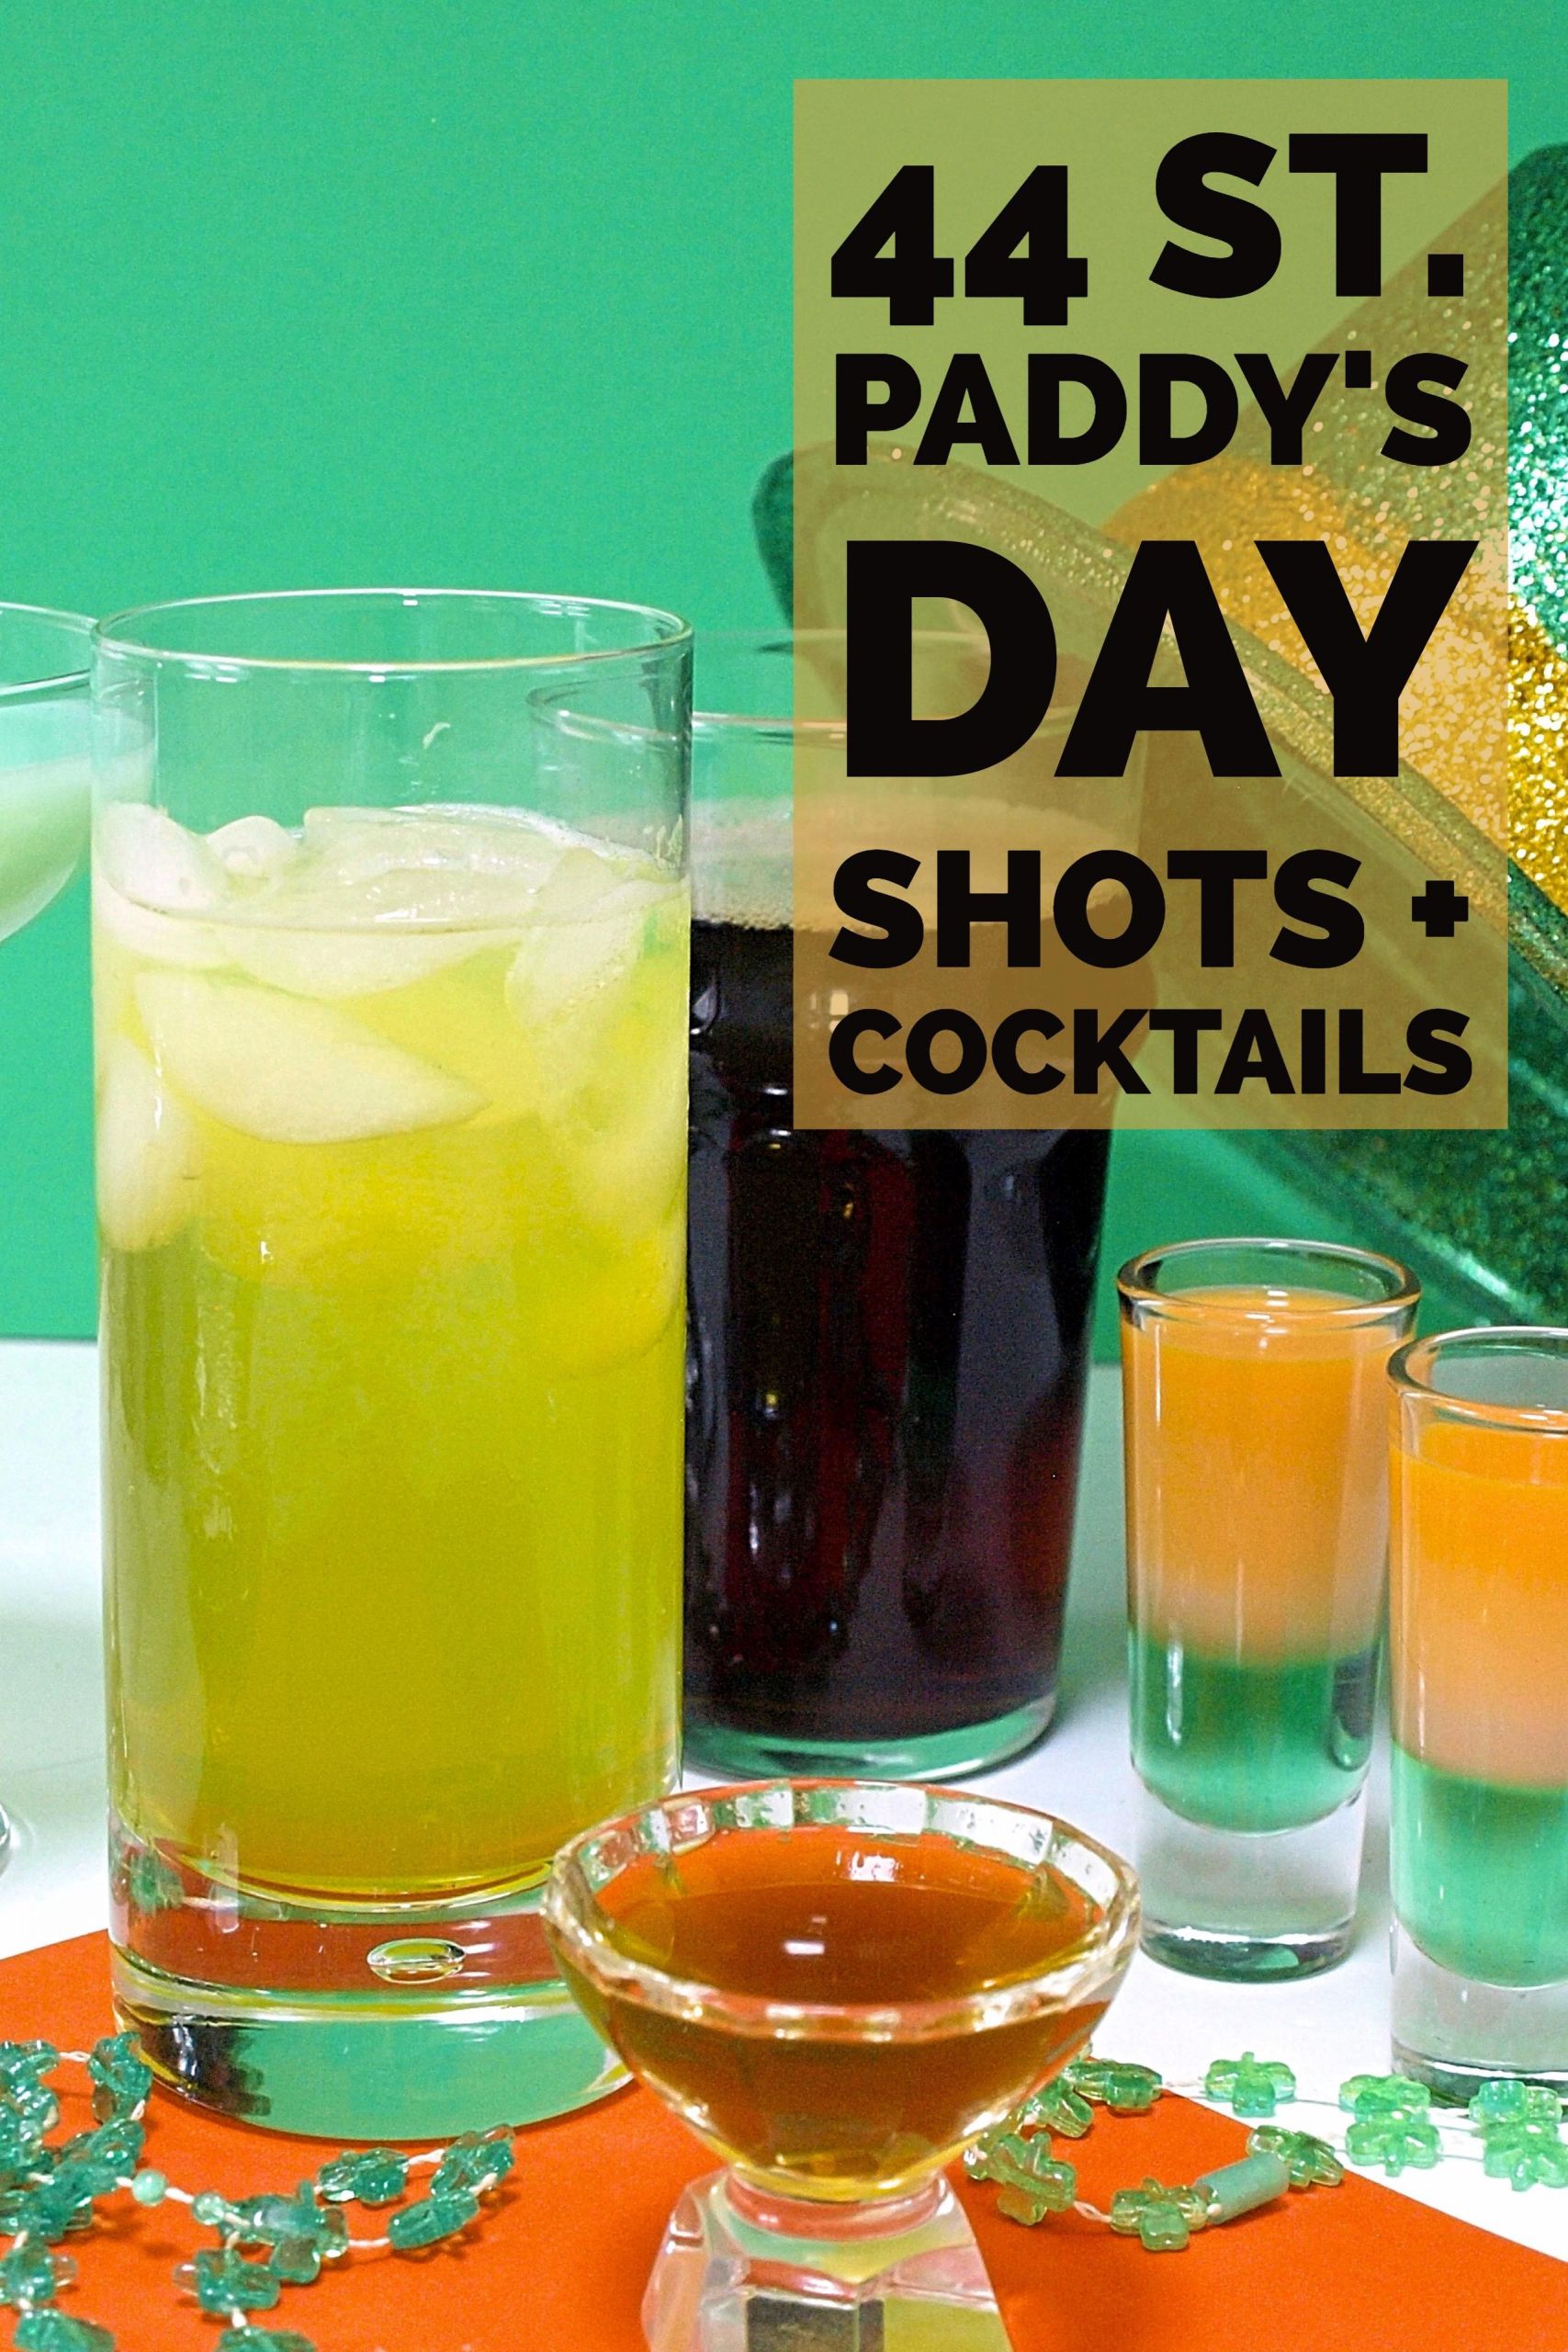 St Patrick's Day Drink Ideas
 40 St Patrick’s Day Shots Shooters and Cocktails